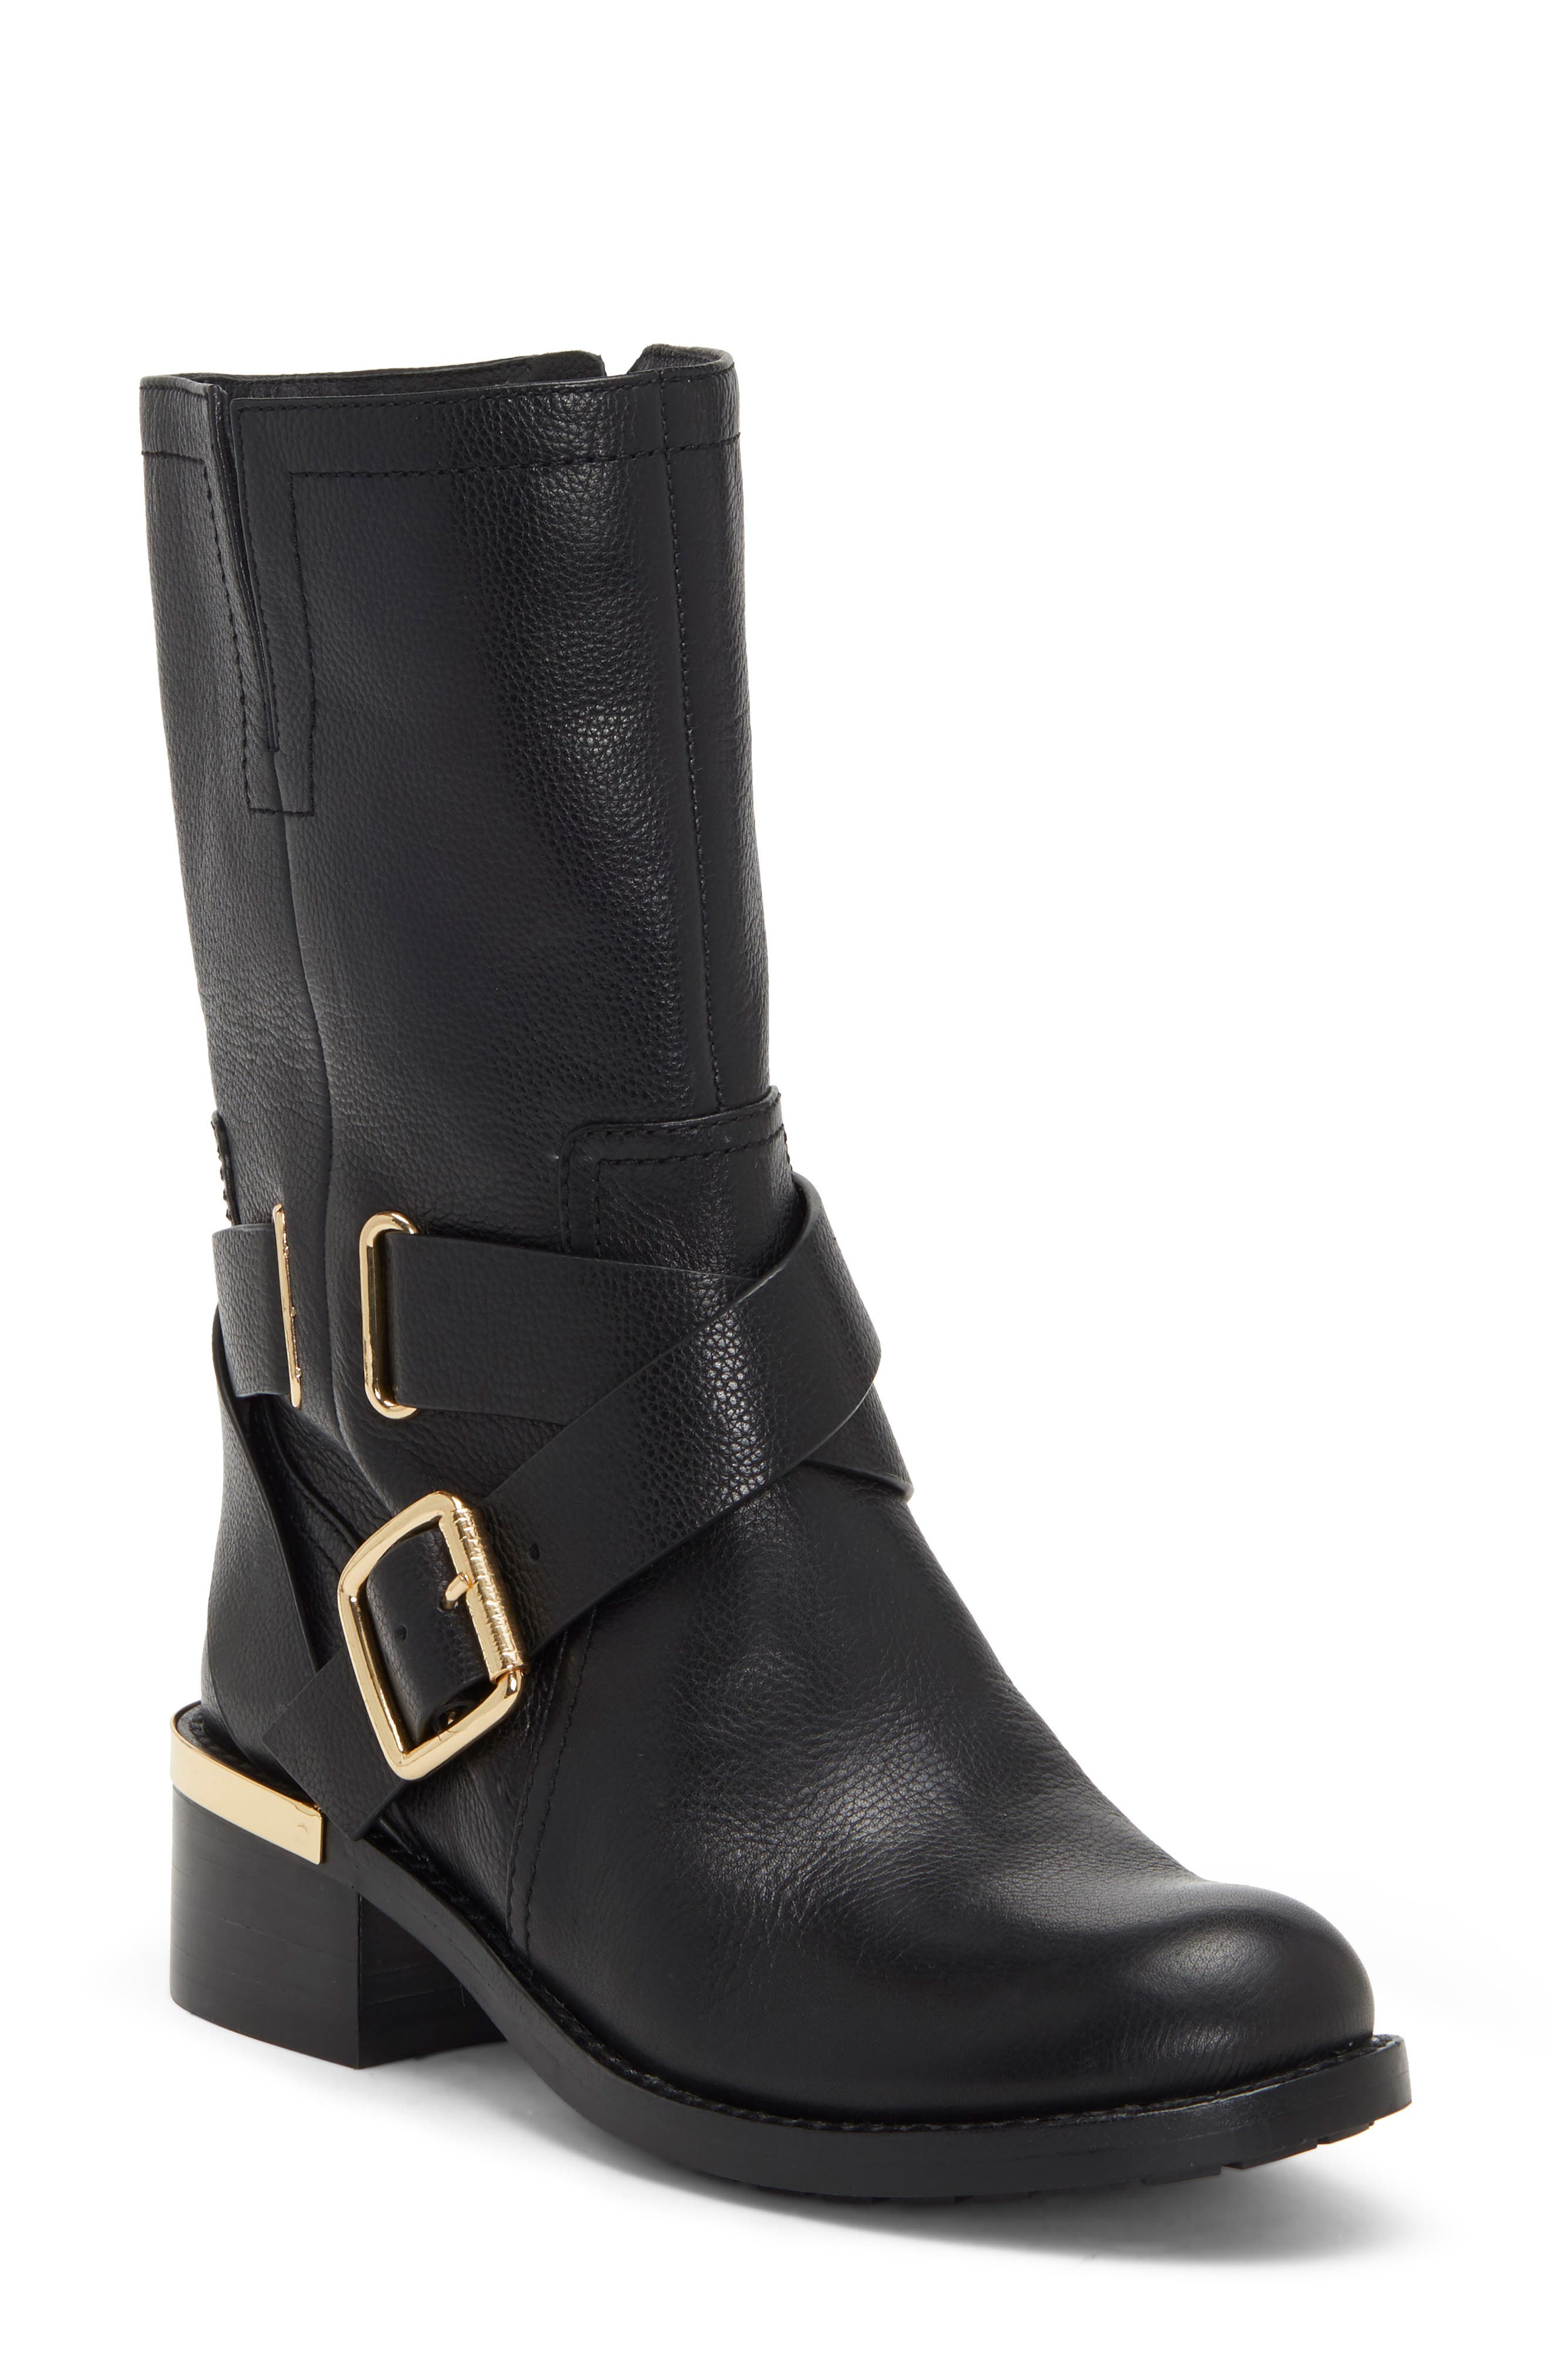 UPC 192151371945 product image for Women's Vince Camuto Wethima Engineer Boot, Size 6.5 M - Black | upcitemdb.com